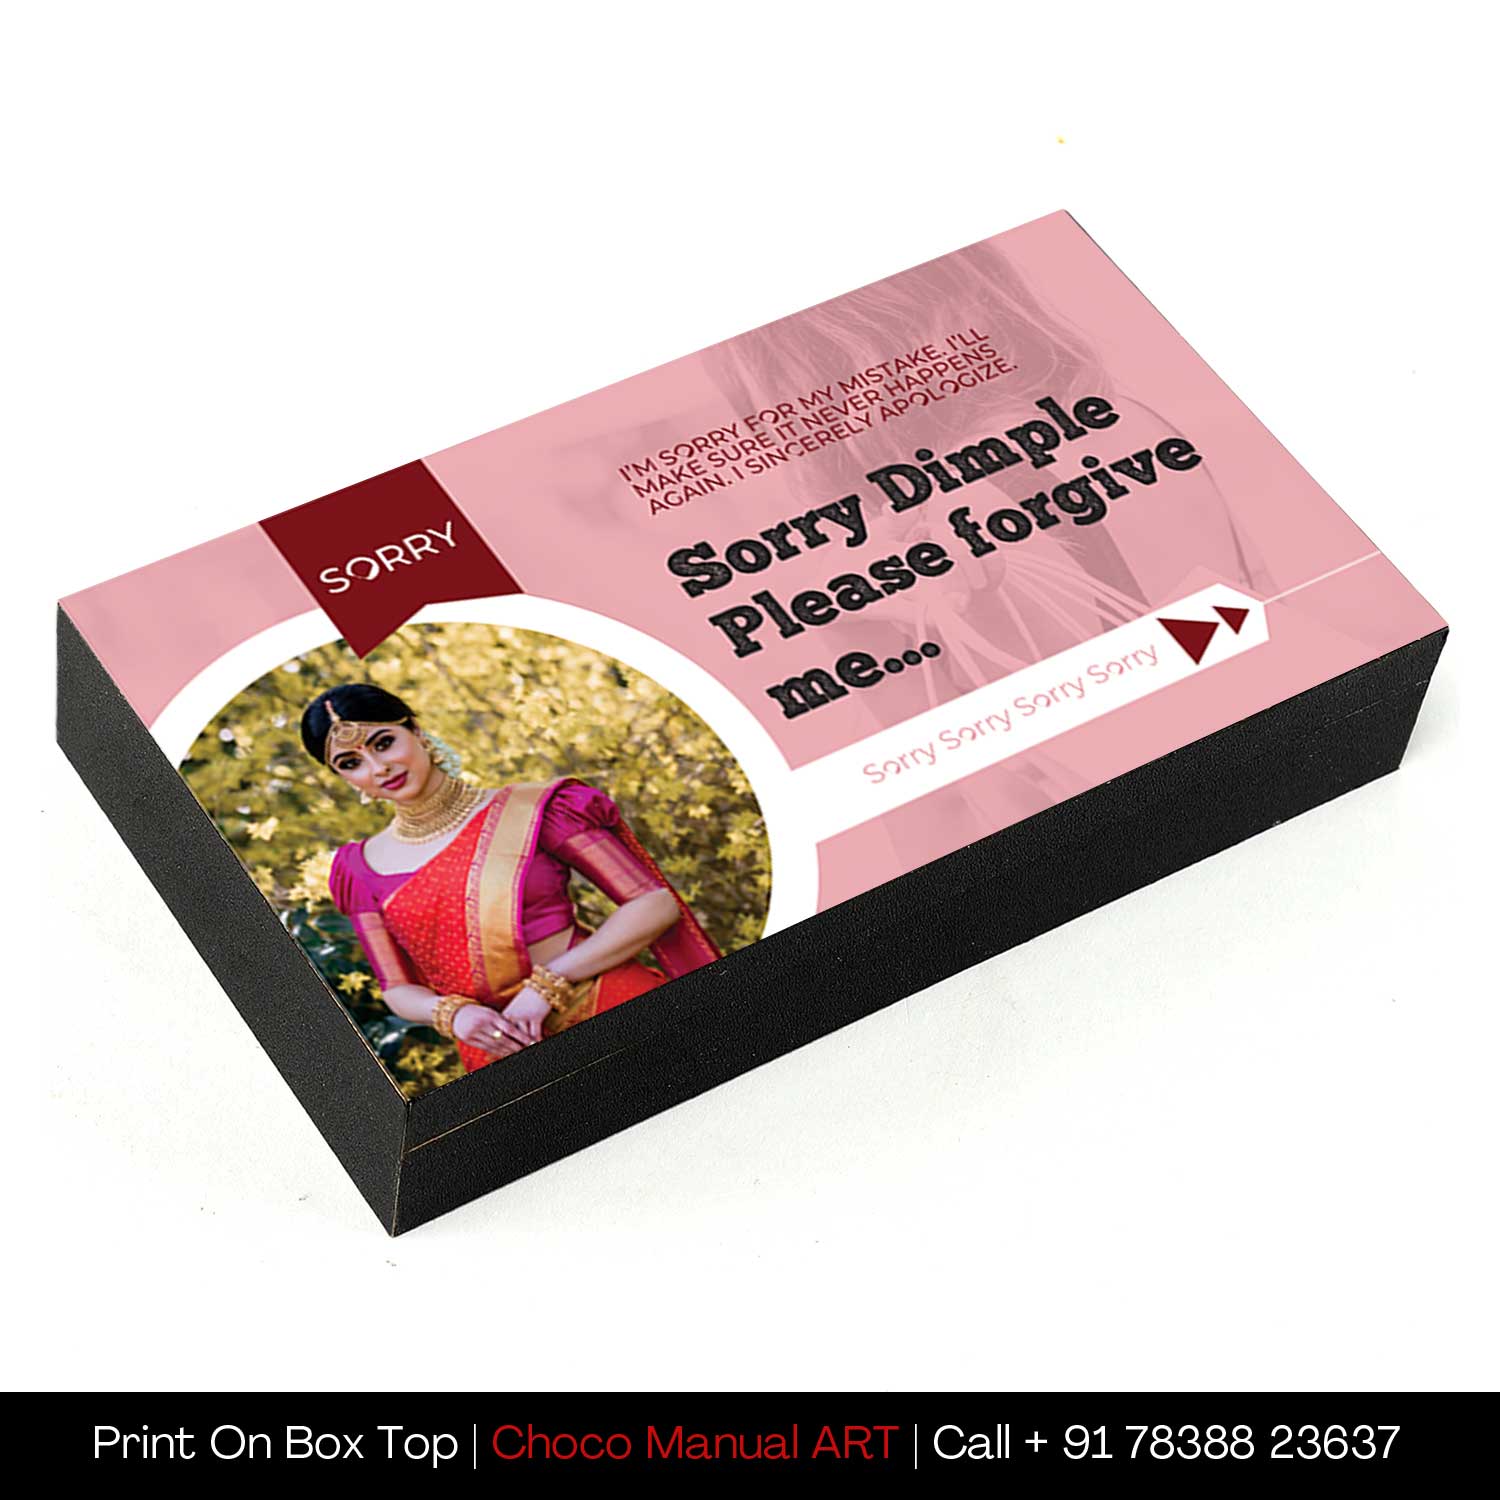 Buy Personalised Chocolate Box Online for SORRY